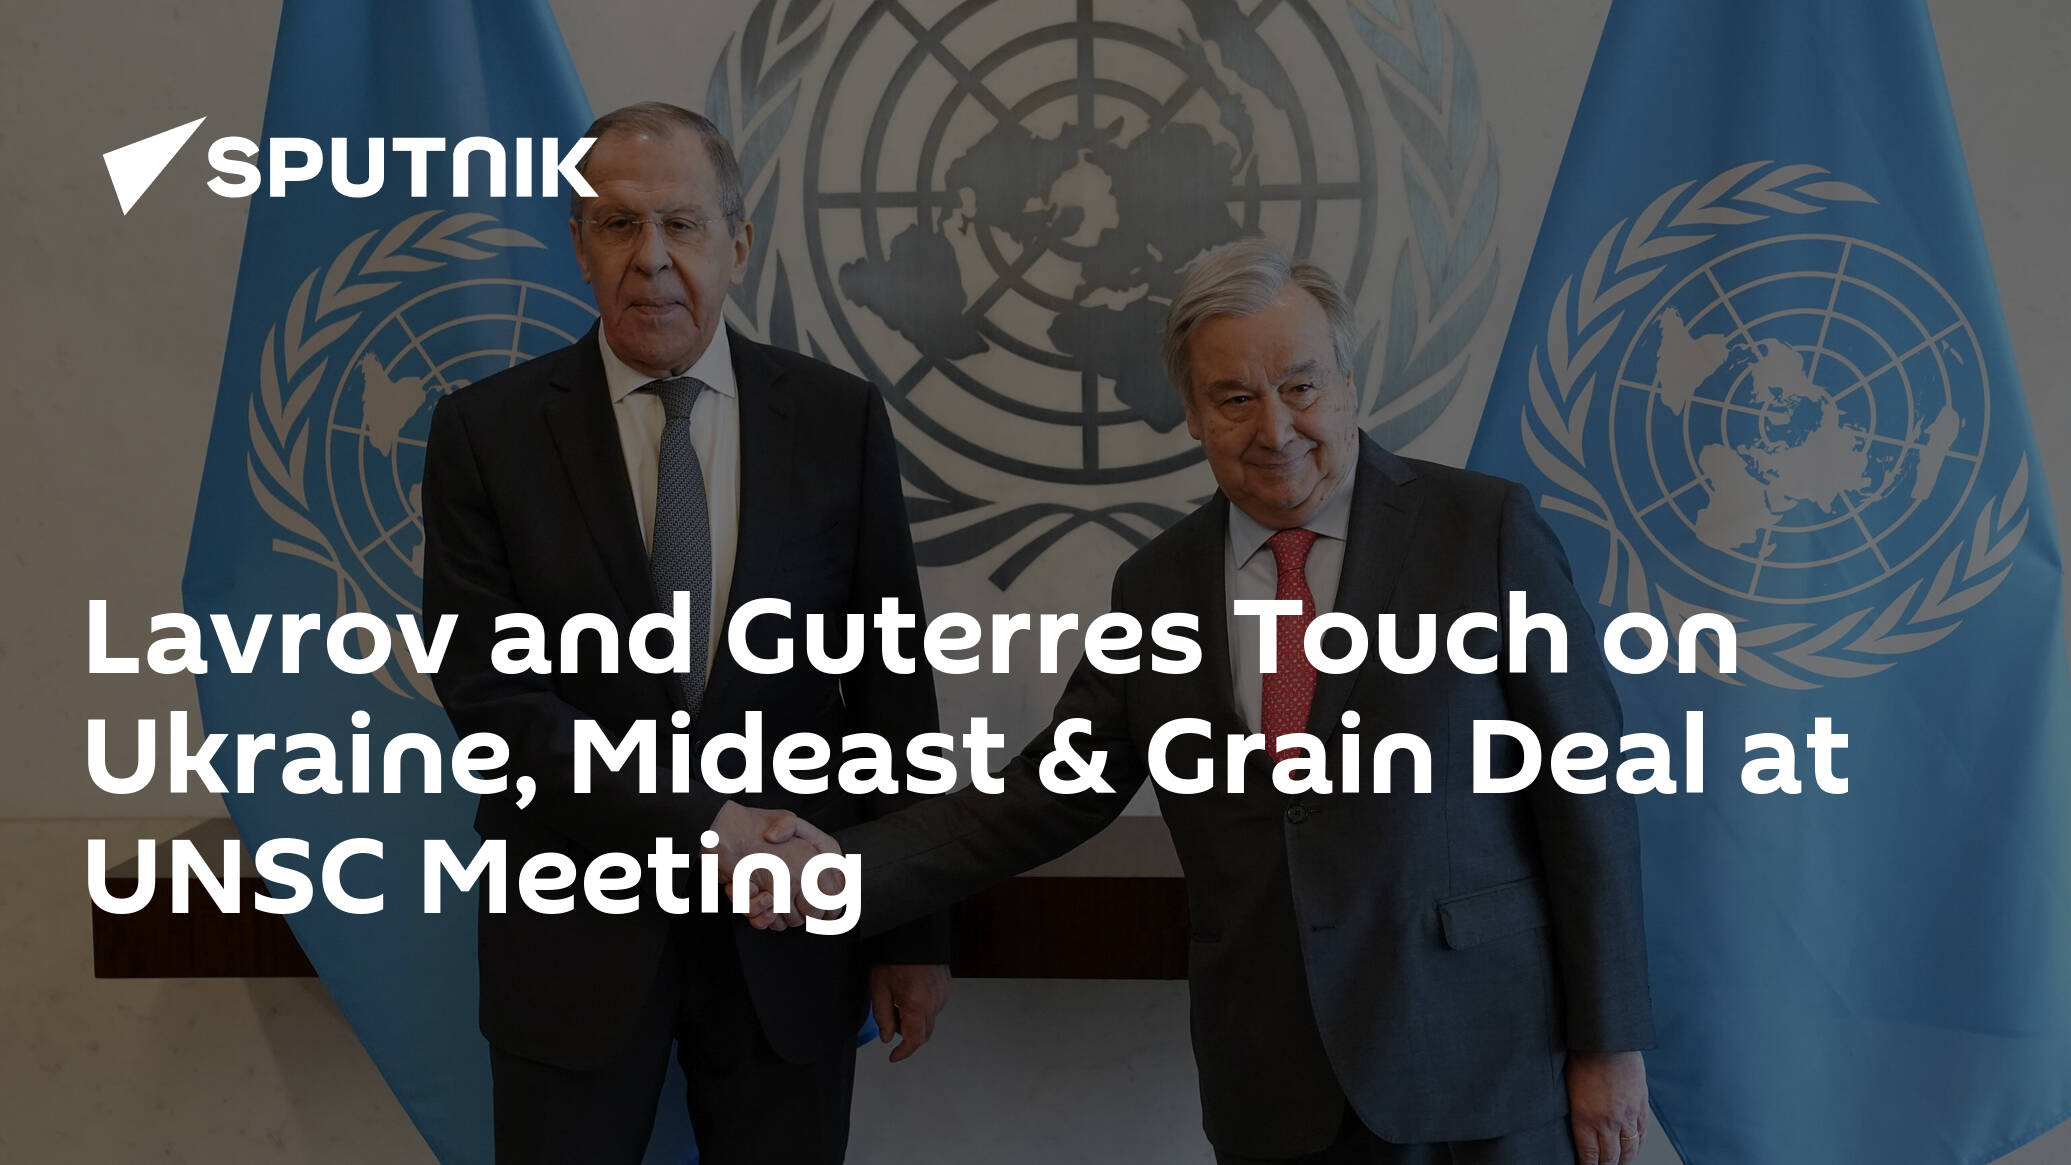 Lavrov and Guterres Touch on Ukraine, Mideast & Grain Deal at UNSC Meeting